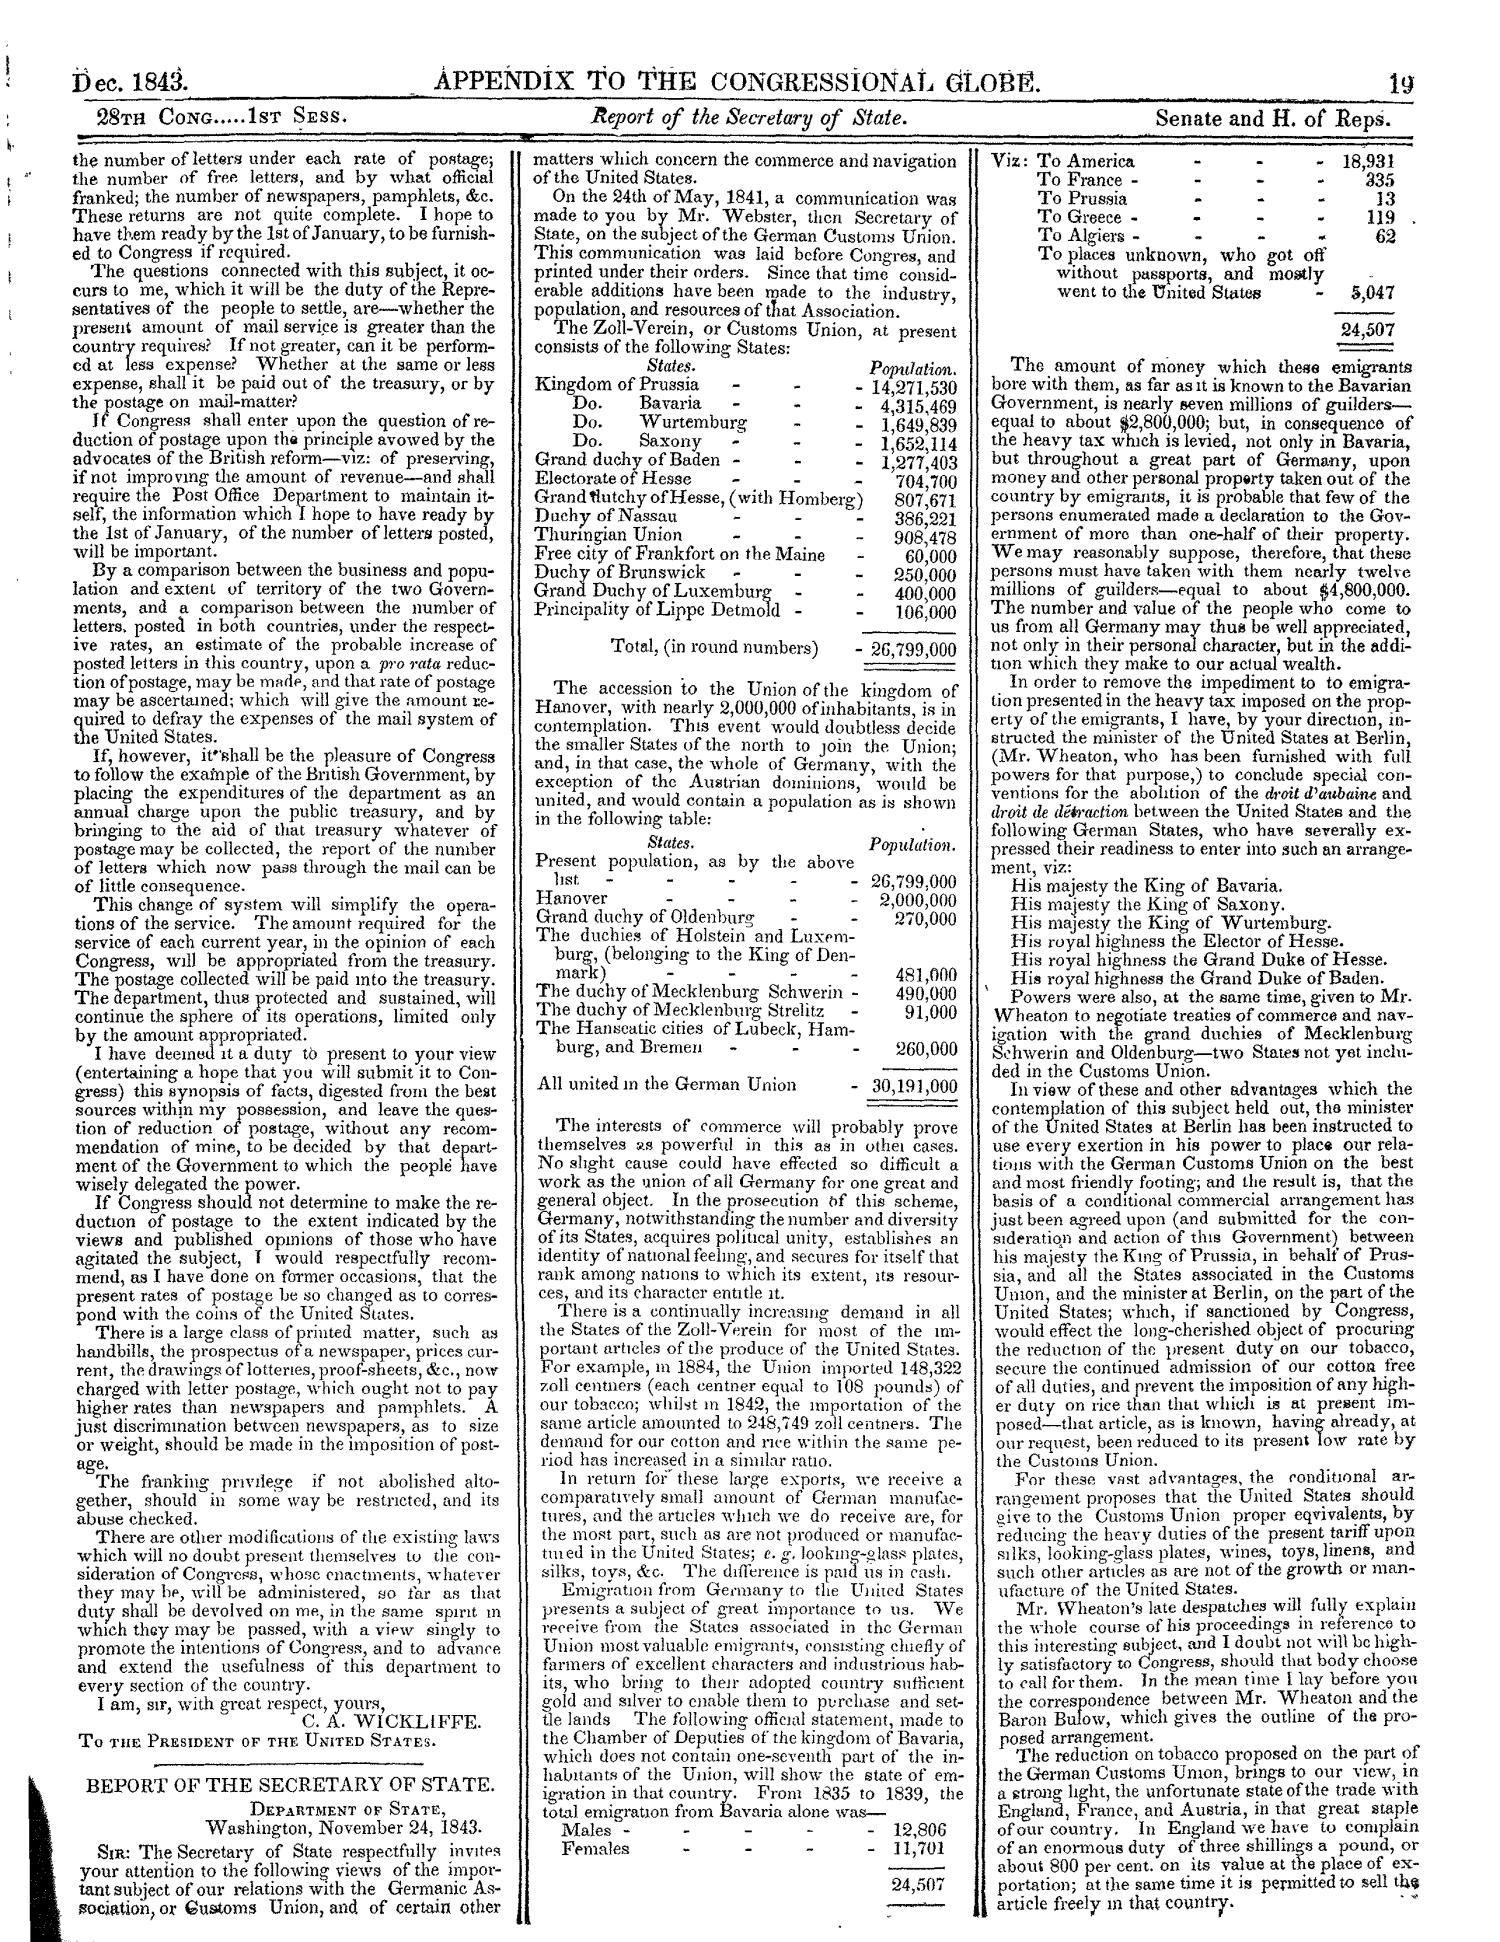 The Congressional Globe, Volume 13, Part 2: Twenty-Eighth Congress, First Session
                                                
                                                    19
                                                